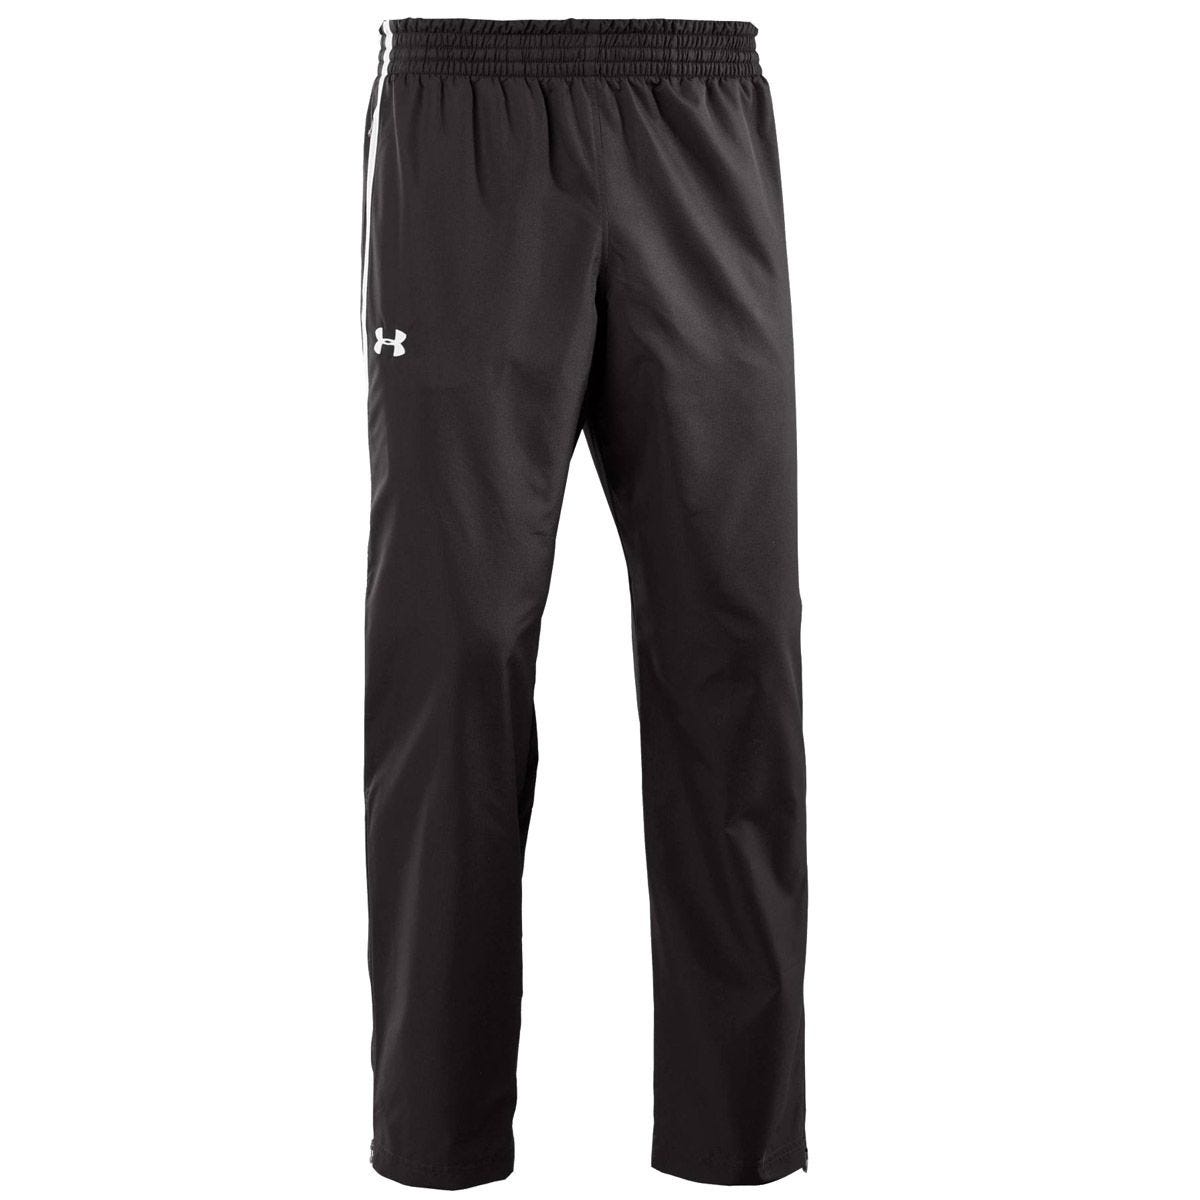 Under Armour Essential Woven Youth Pants